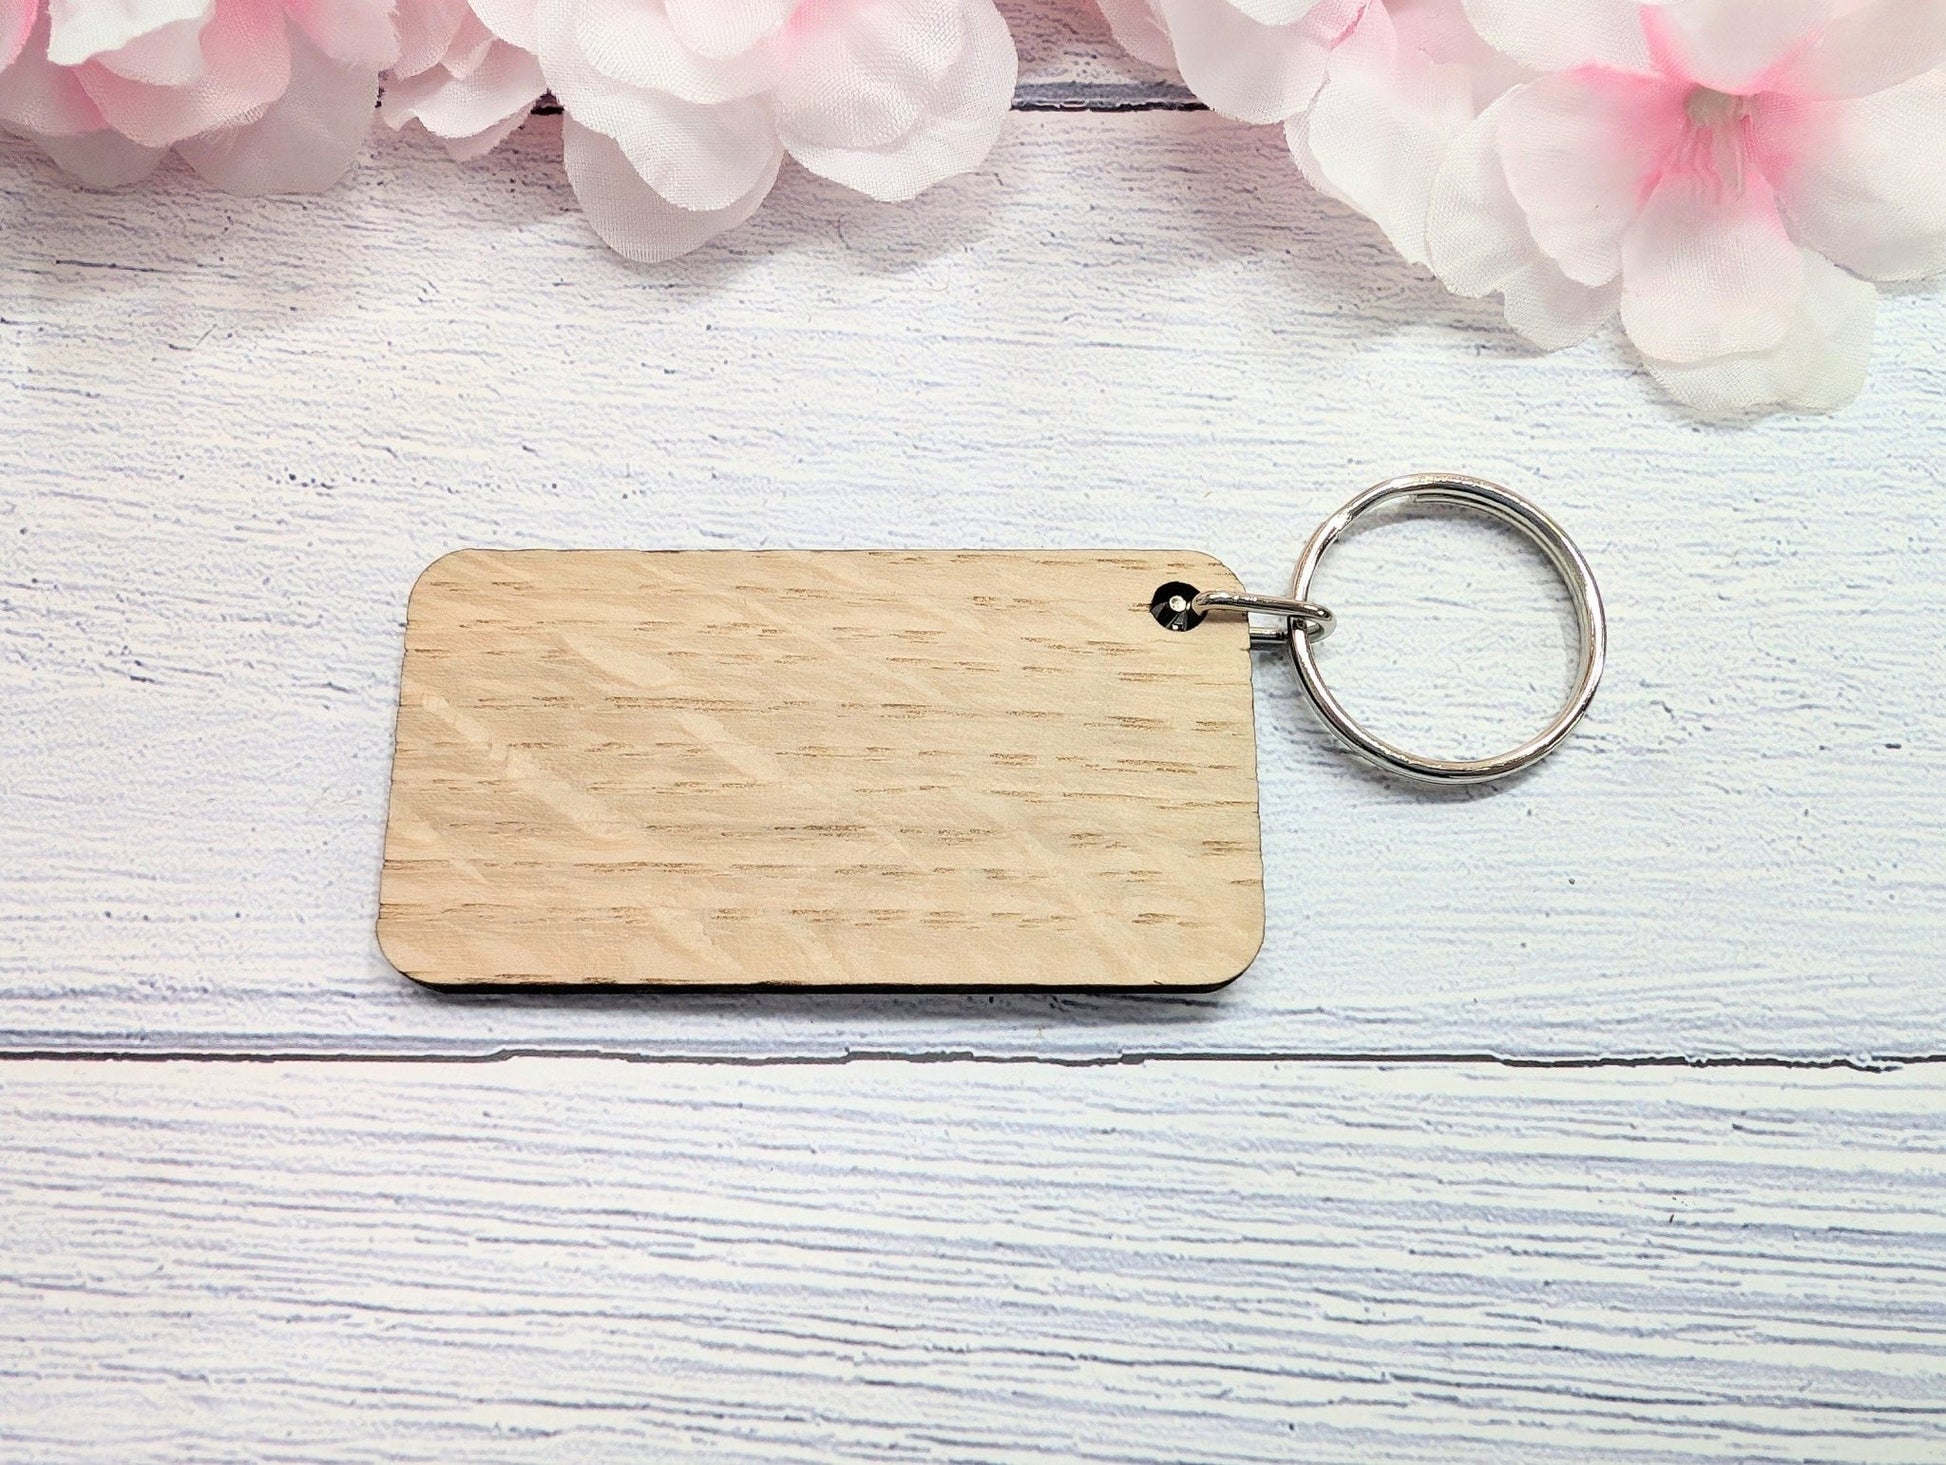 Touch Wood Oak Veneer Keyring - 65x35mm, Superstition Gift | Crafted in Wales, Unique Keepsake, Perfect for Superstitious Folk, Eco-Friendly - CherryGroveCraft